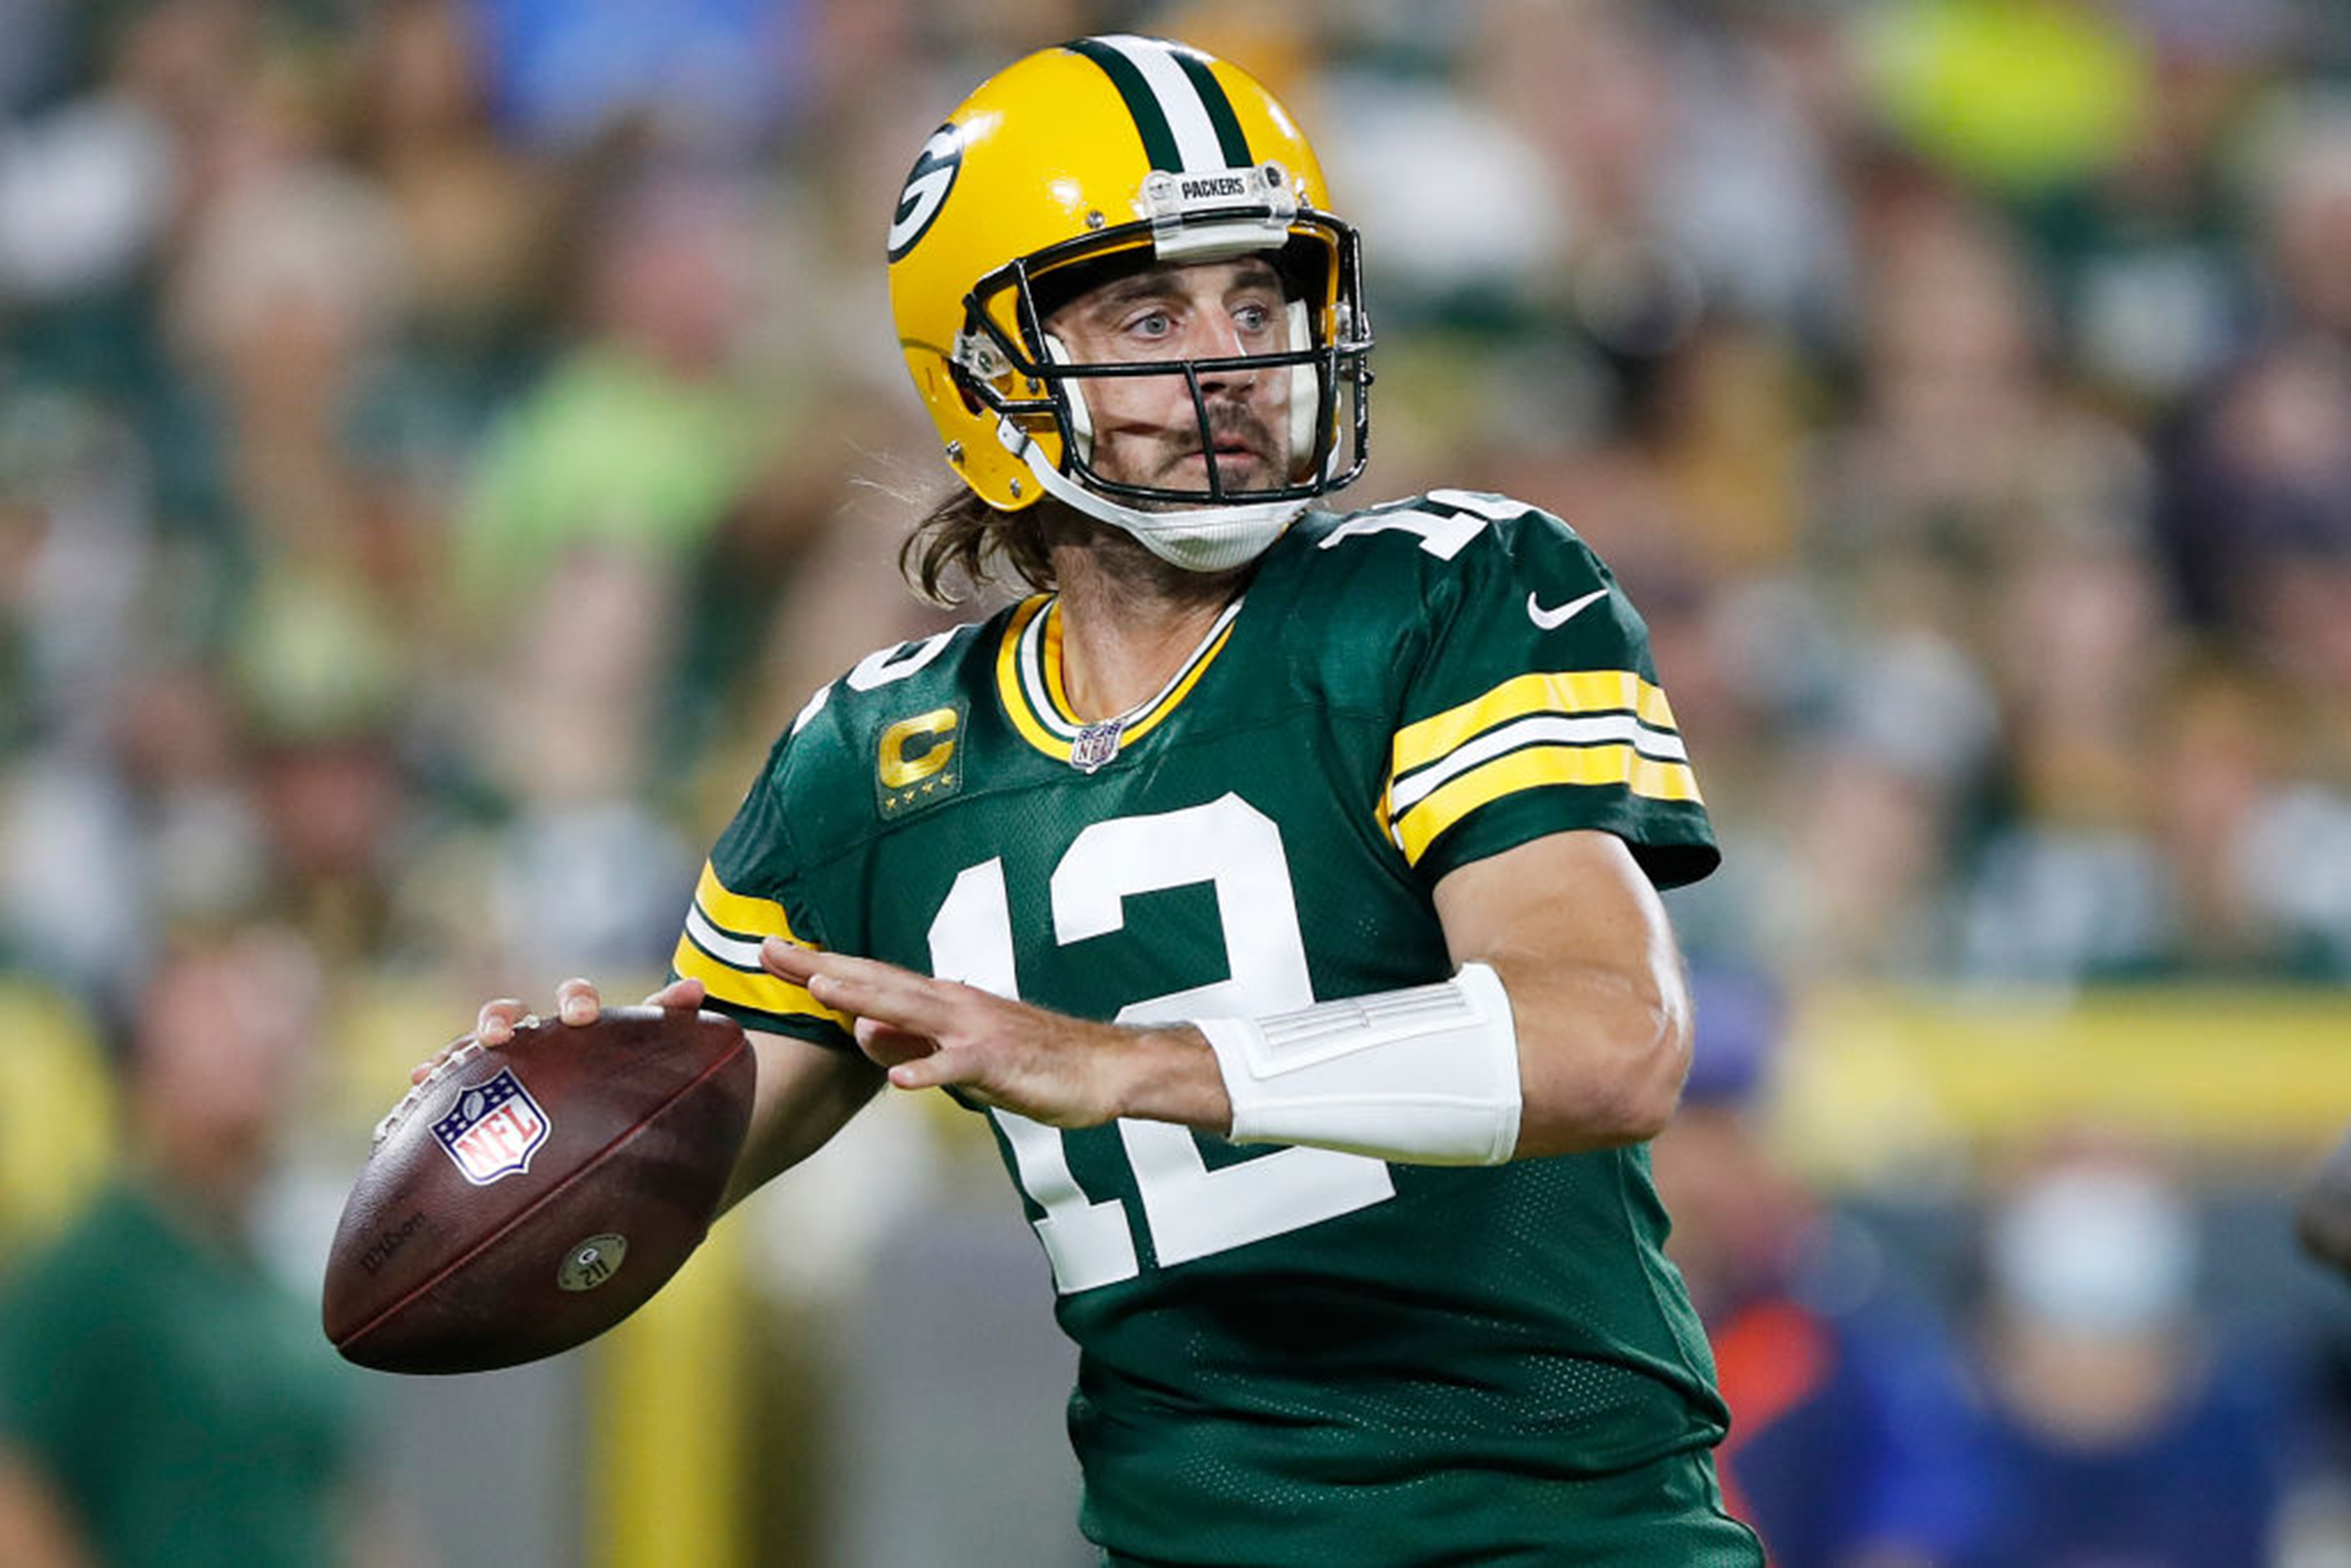 No lie, Aaron Rodgers: COVID-19 is largely spread by unvaccinated people